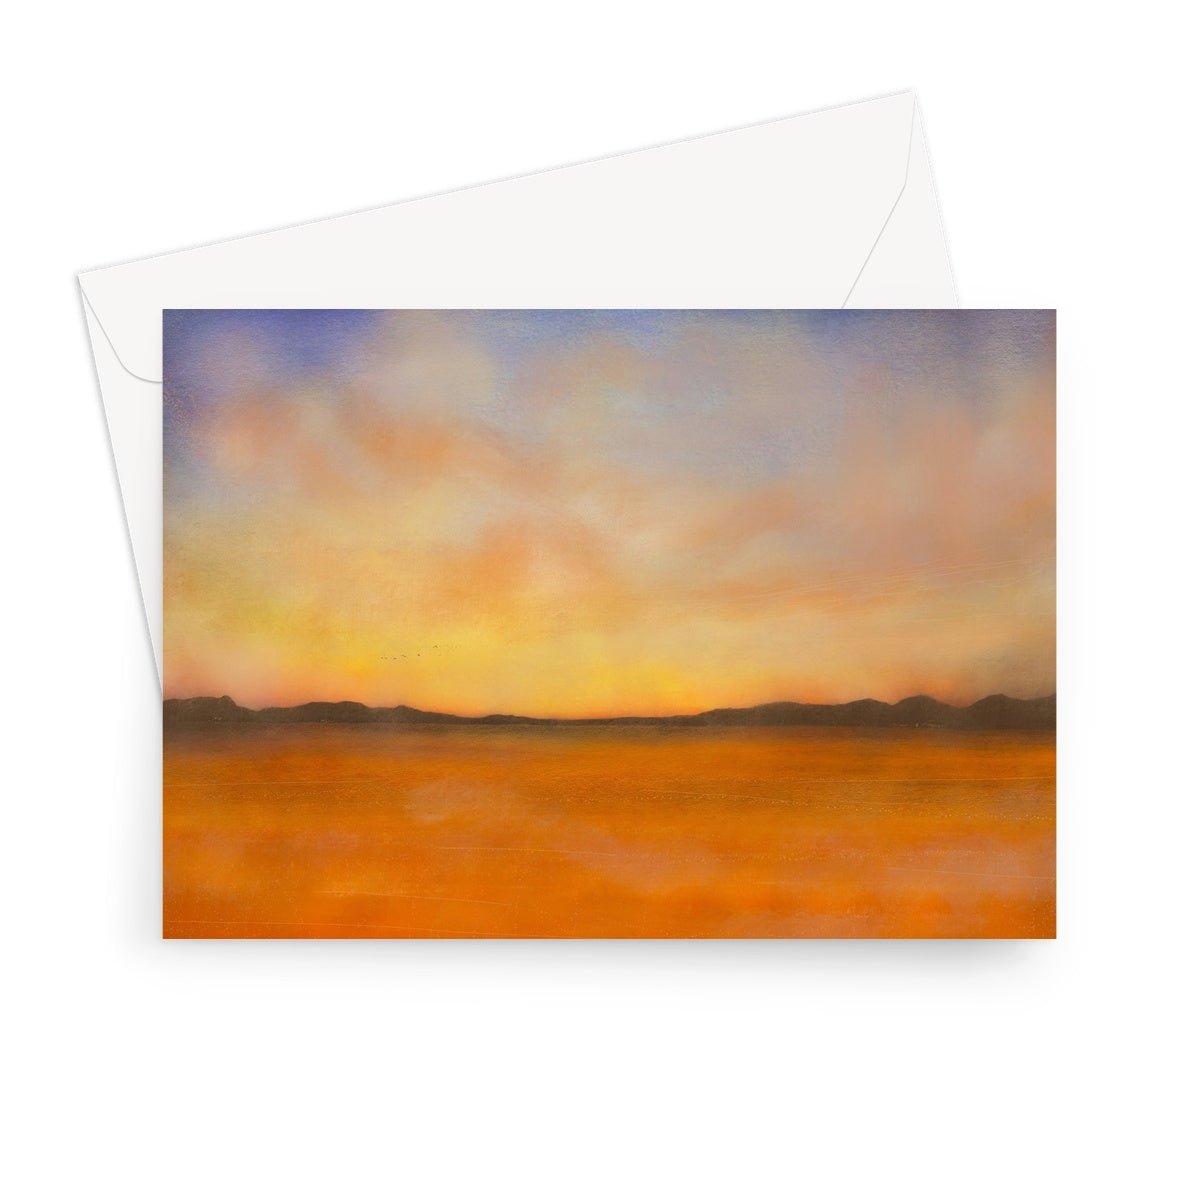 Islay Dawn Art Gifts Greeting Card-Greetings Cards-Hebridean Islands Art Gallery-7"x5"-10 Cards-Paintings, Prints, Homeware, Art Gifts From Scotland By Scottish Artist Kevin Hunter